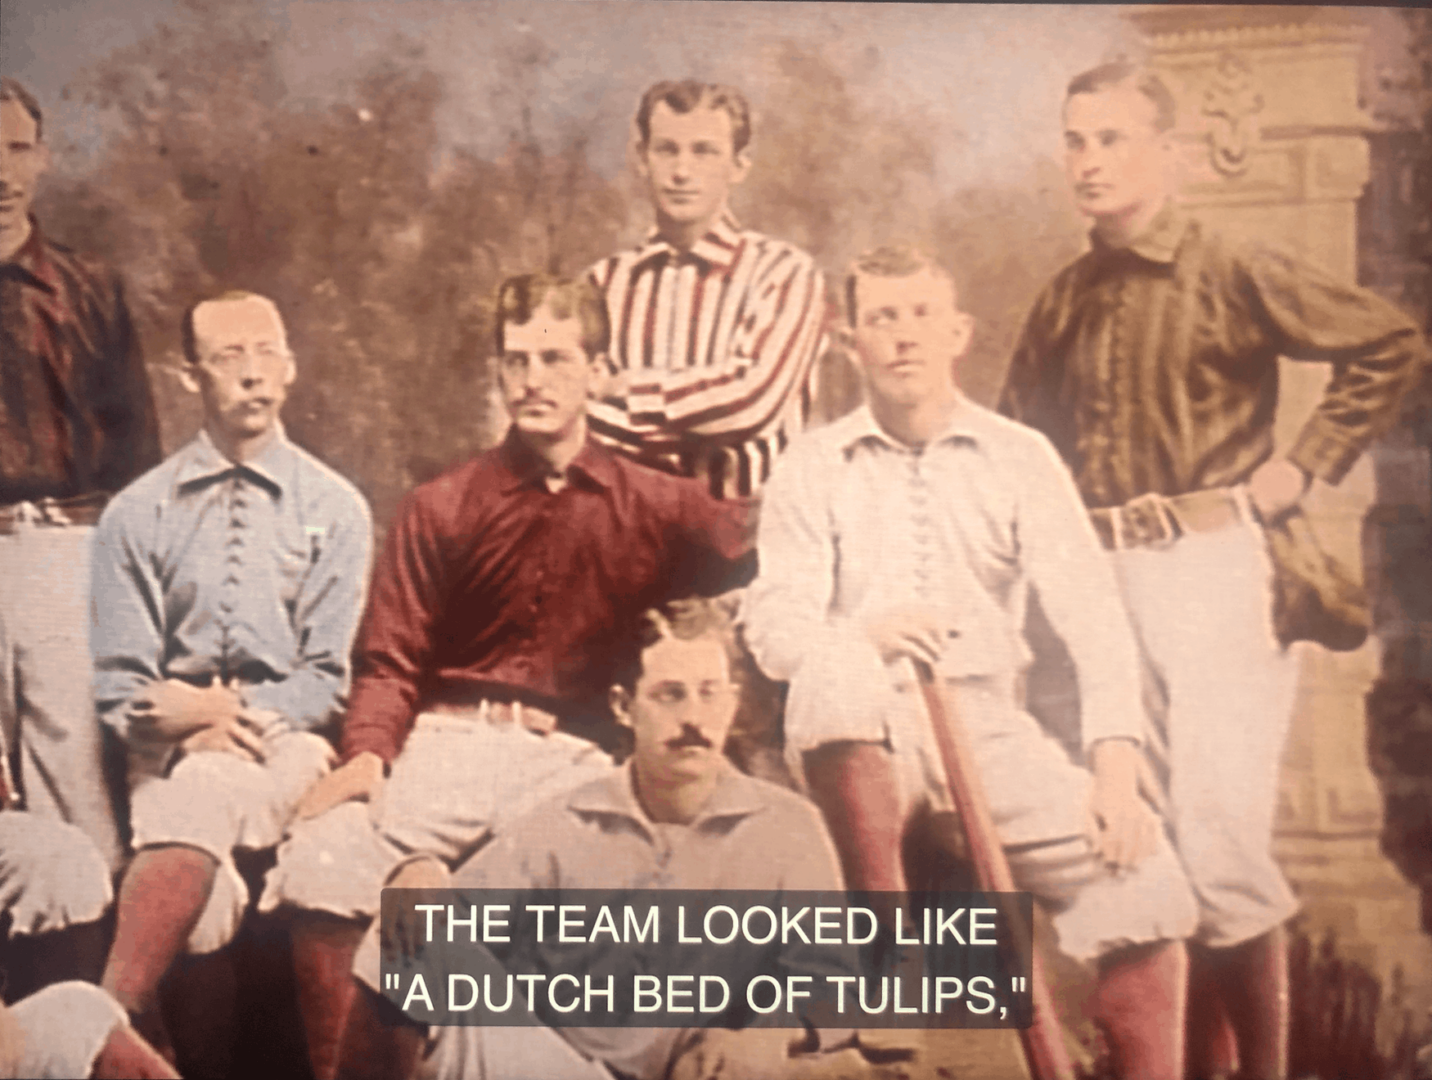 The team looked like a dutch bed of tulips